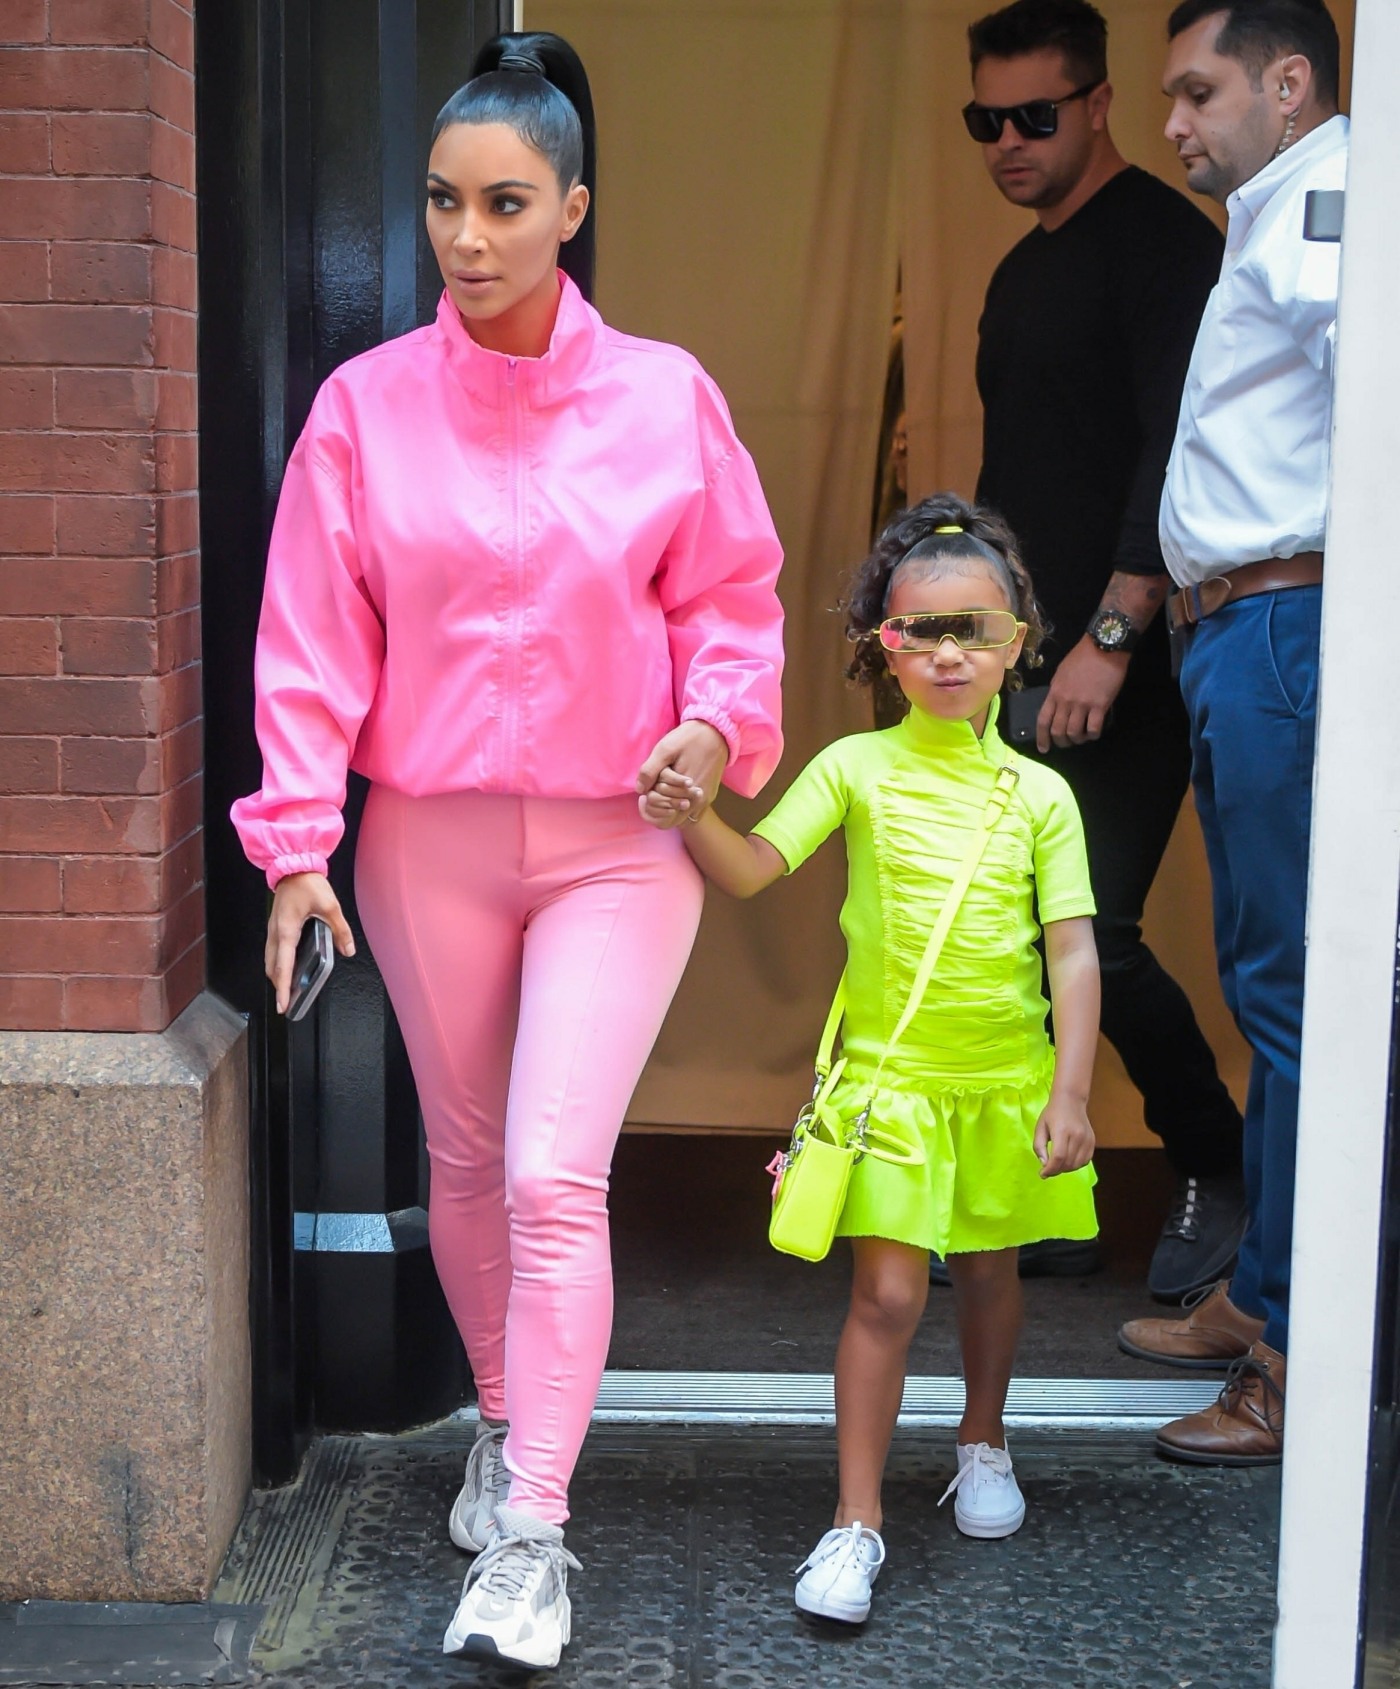 Kim Kardashian steps out with her kids before Kanye West's performance on SNL